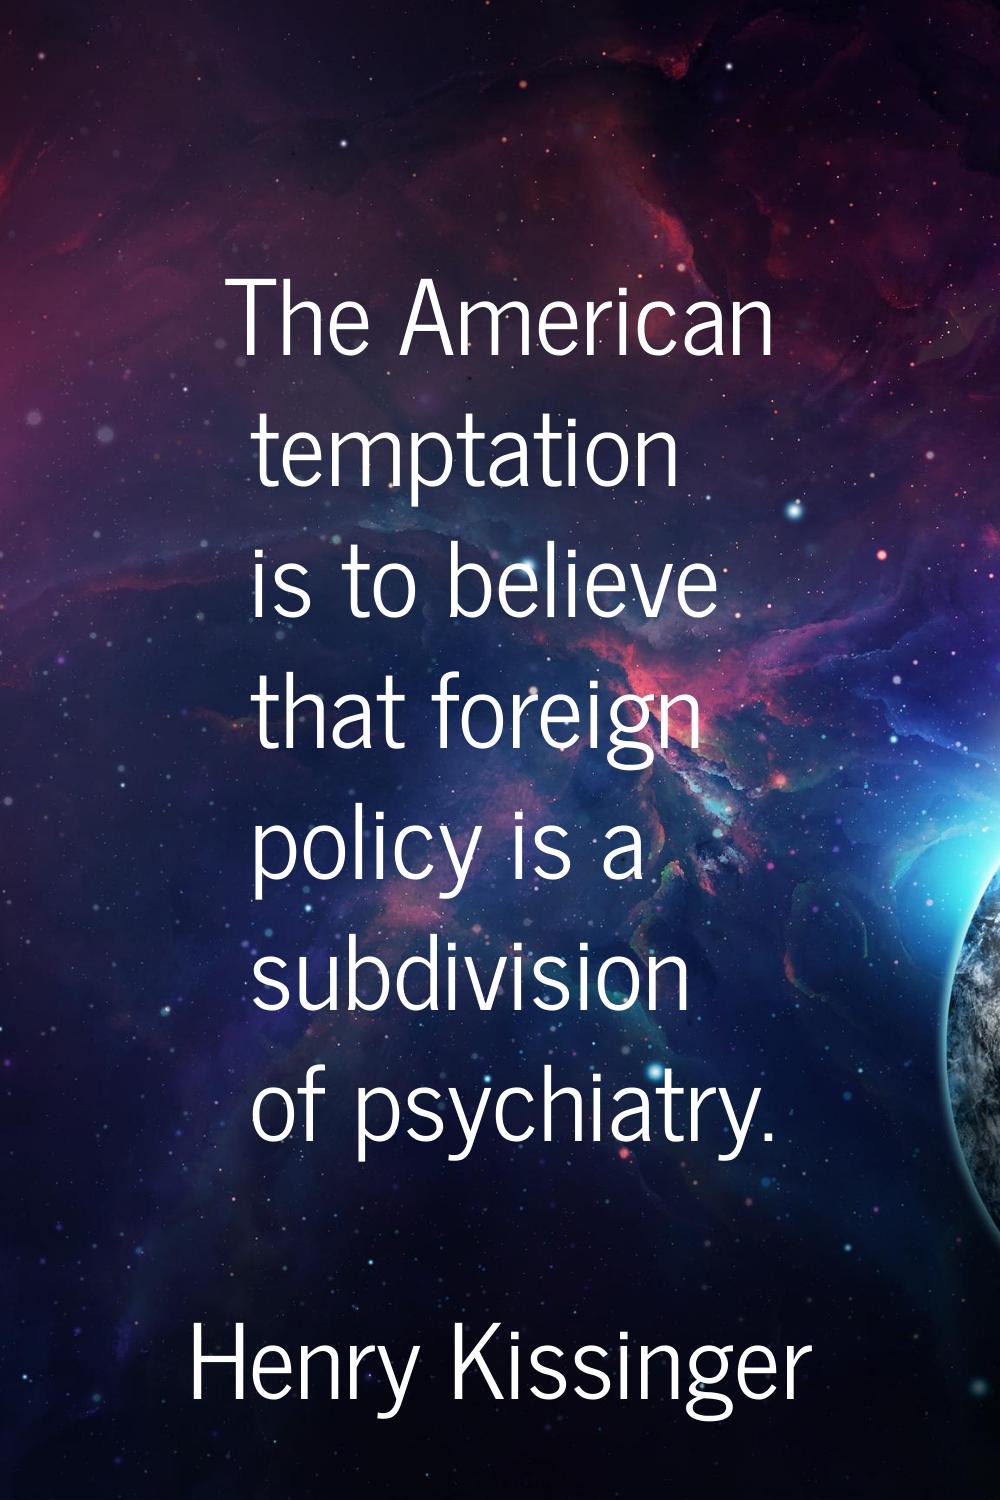 The American temptation is to believe that foreign policy is a subdivision of psychiatry.